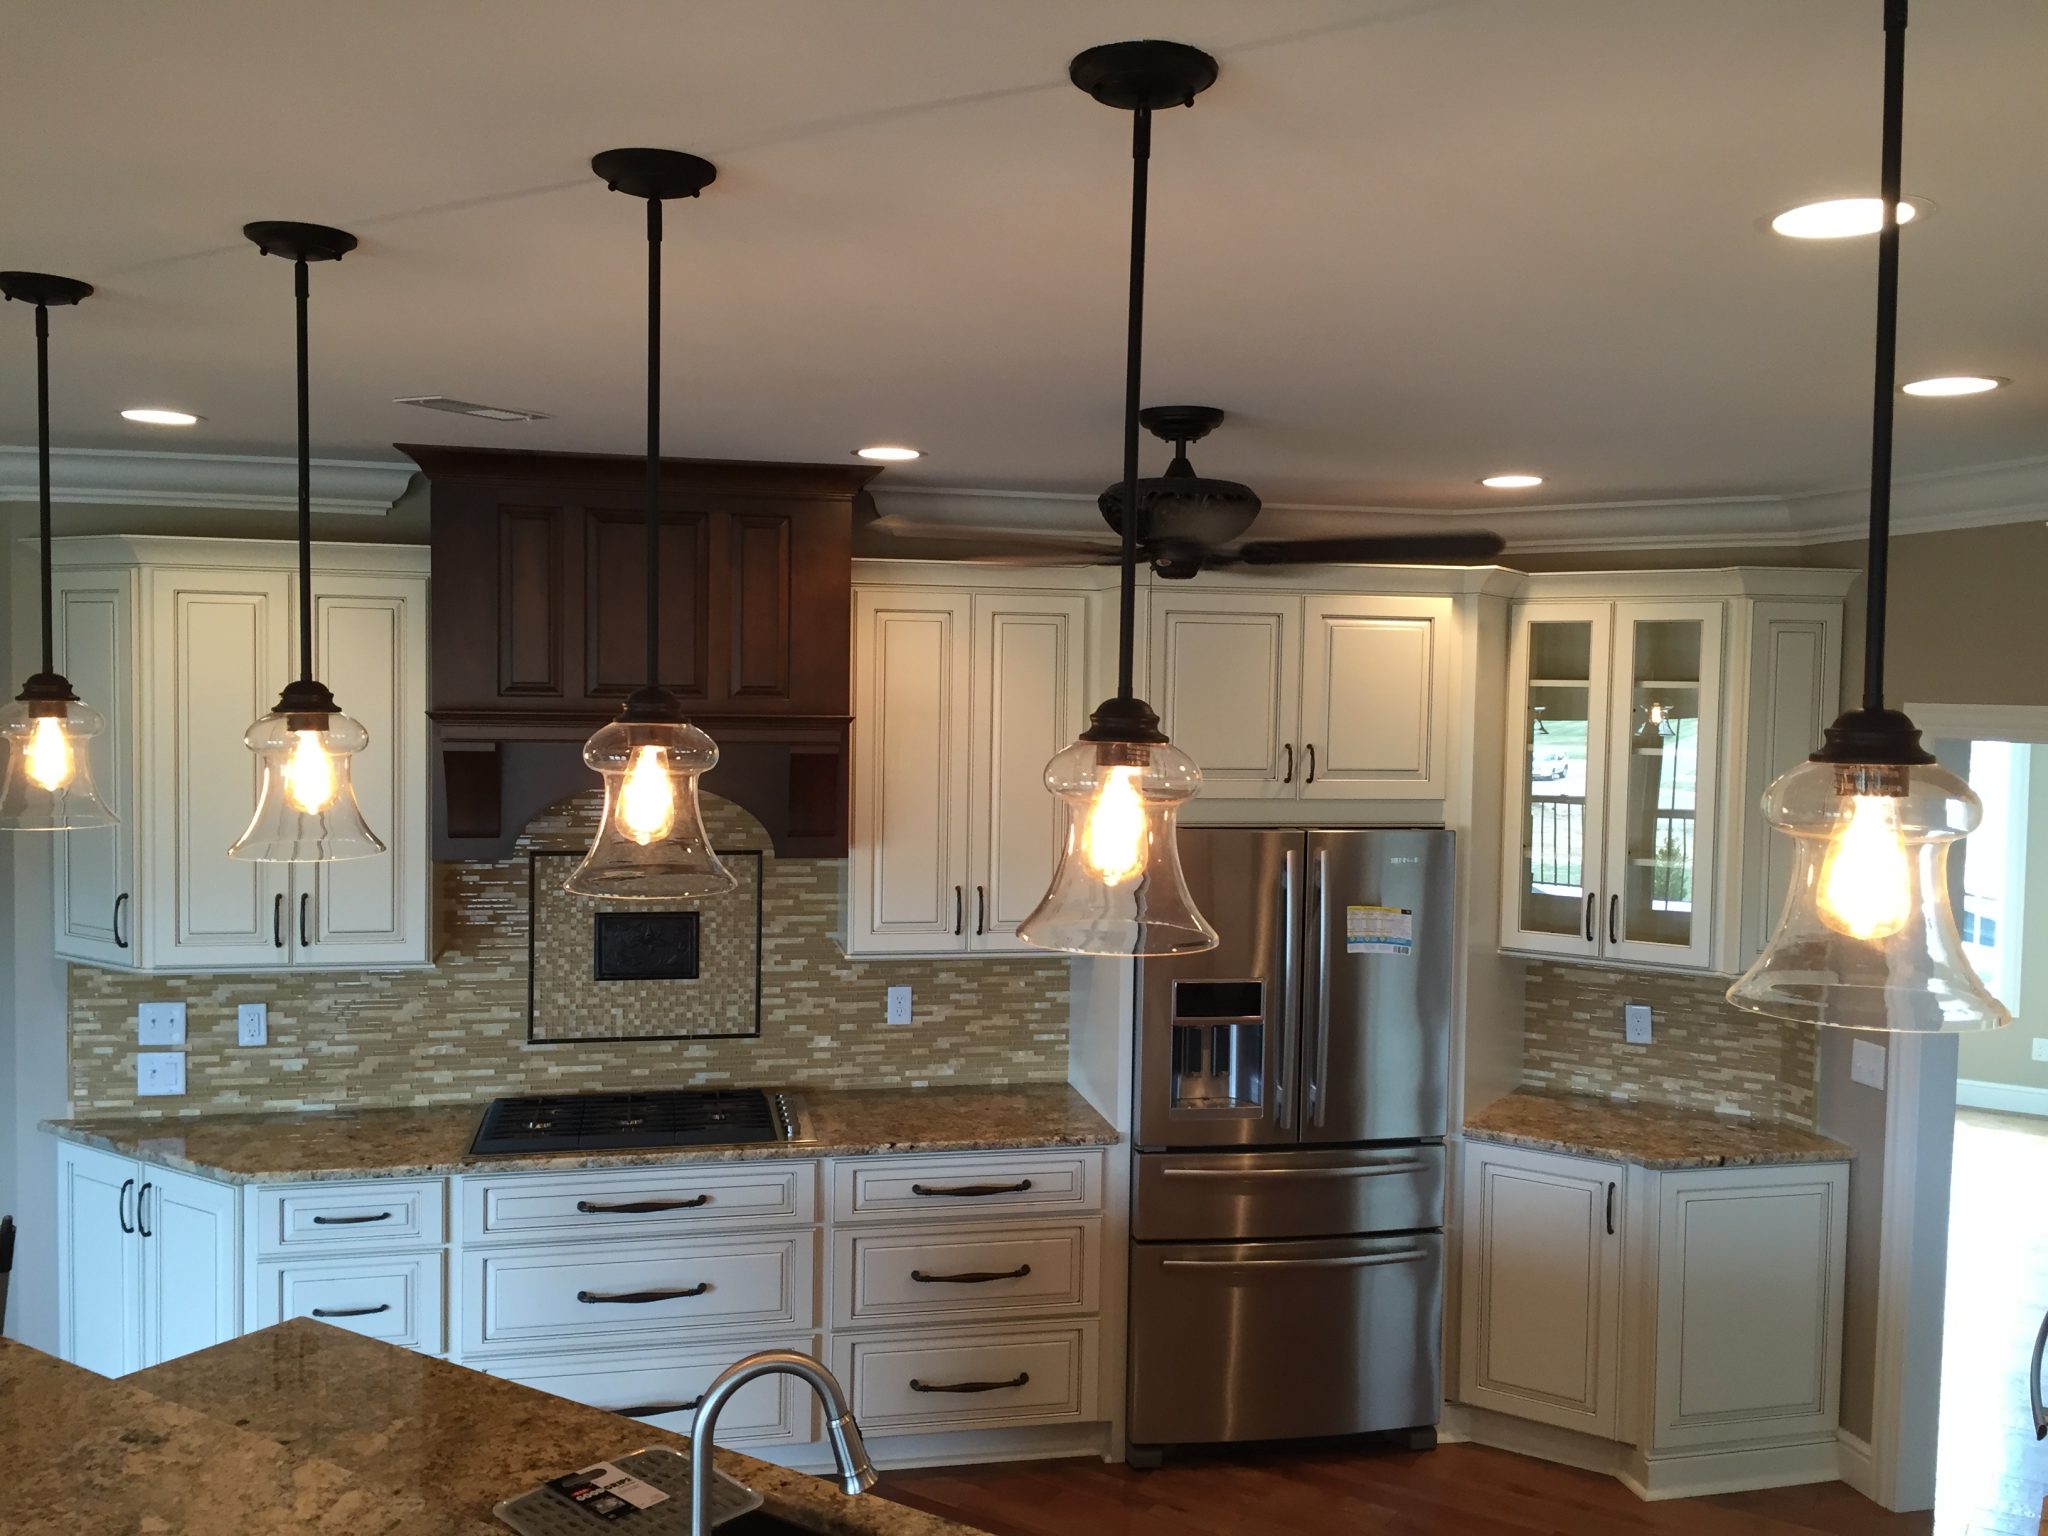 close up of hanging lights in kitchen